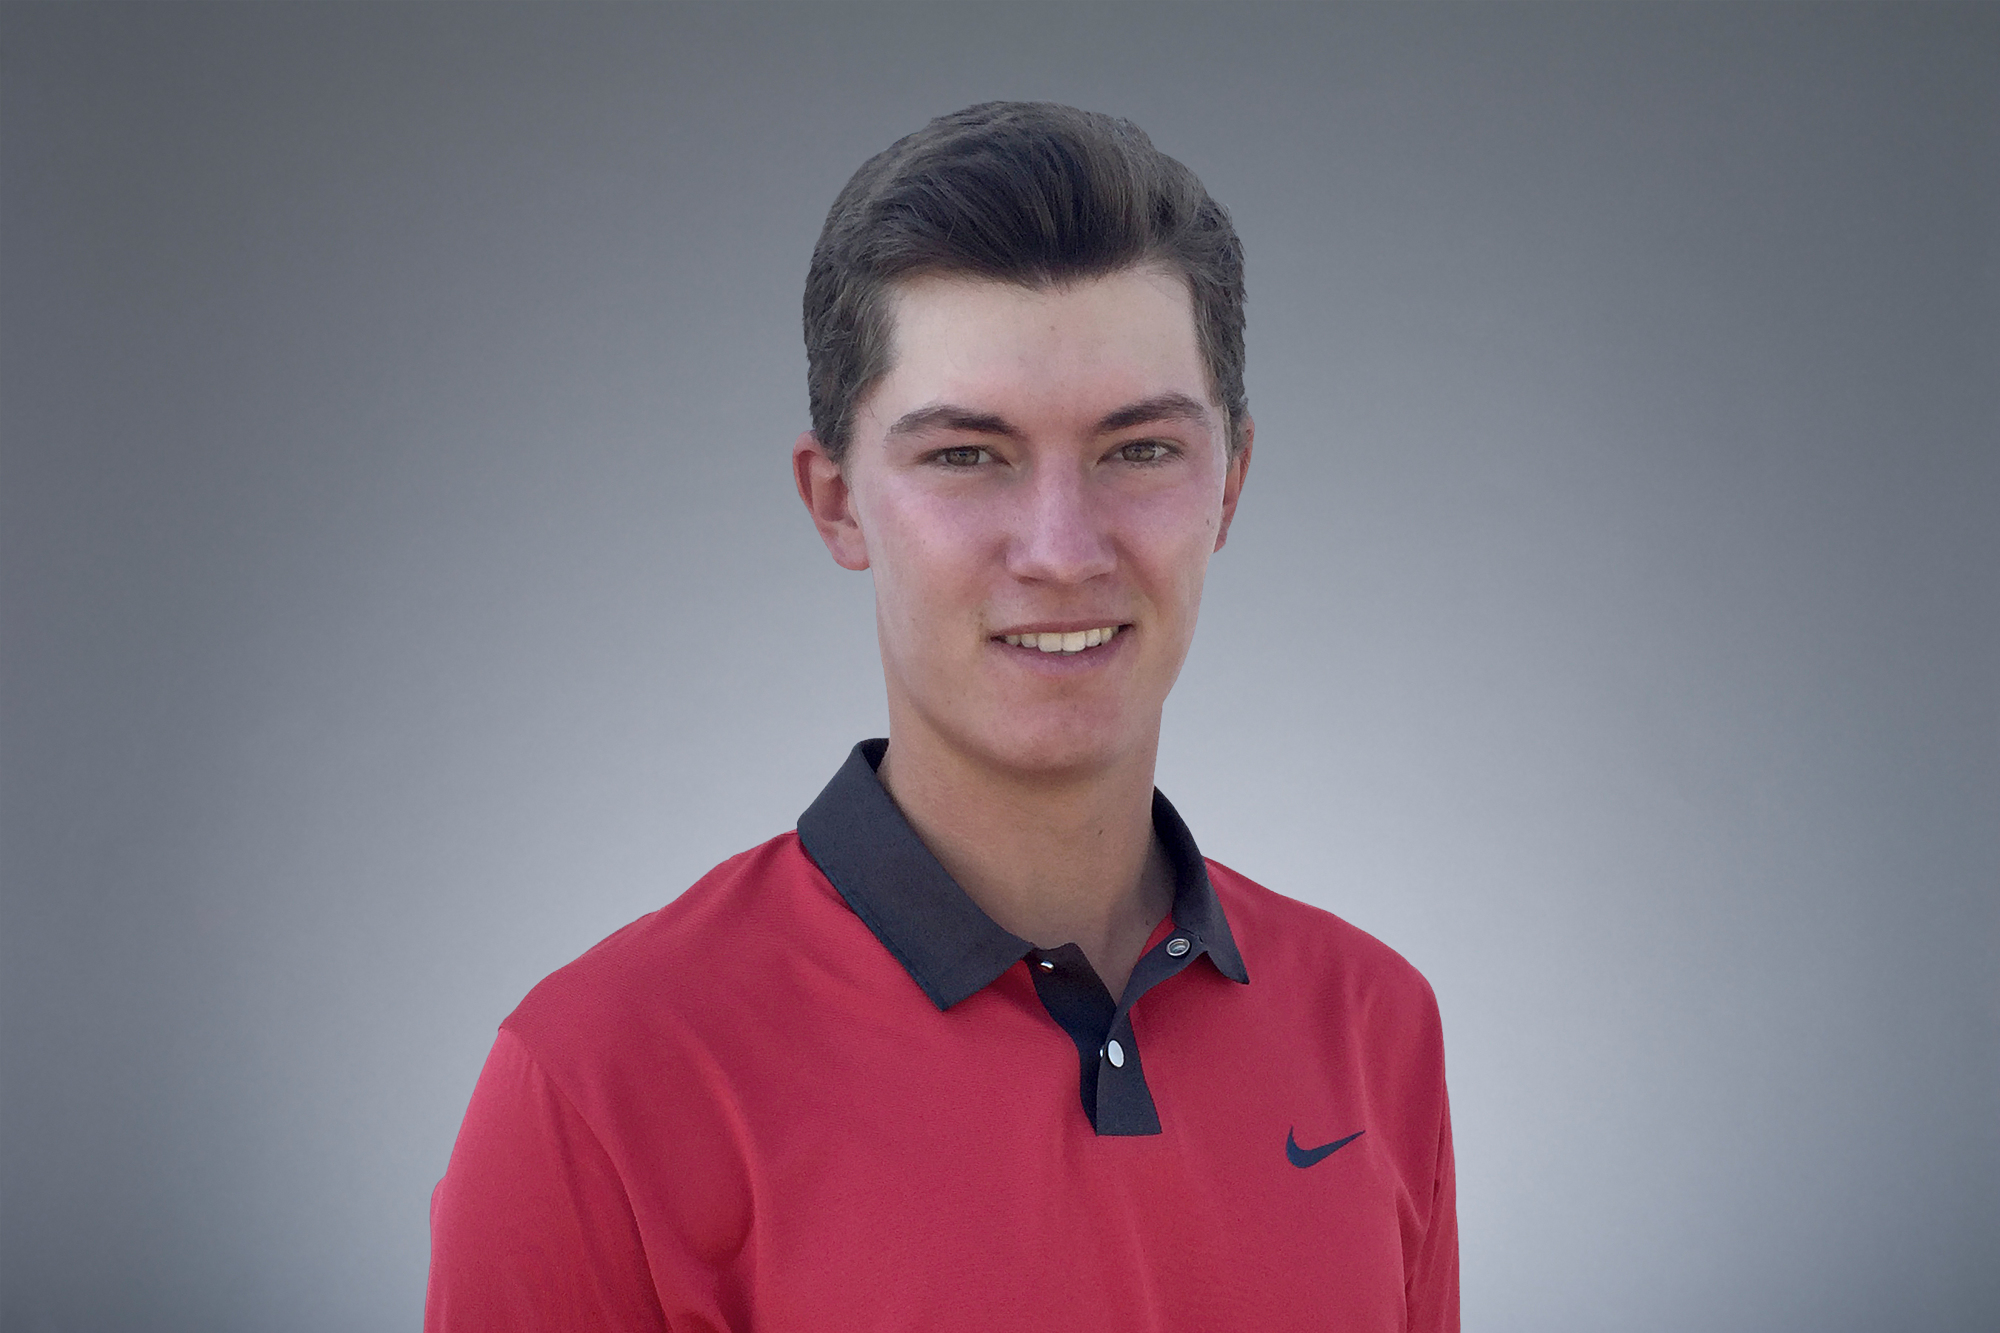 10. Maverick McNealy, son of Sun Microsystems co-founder Scott McNealy, was once the top-ranked amateur golfer in the world. Photo courtesy PGA Tour Media.